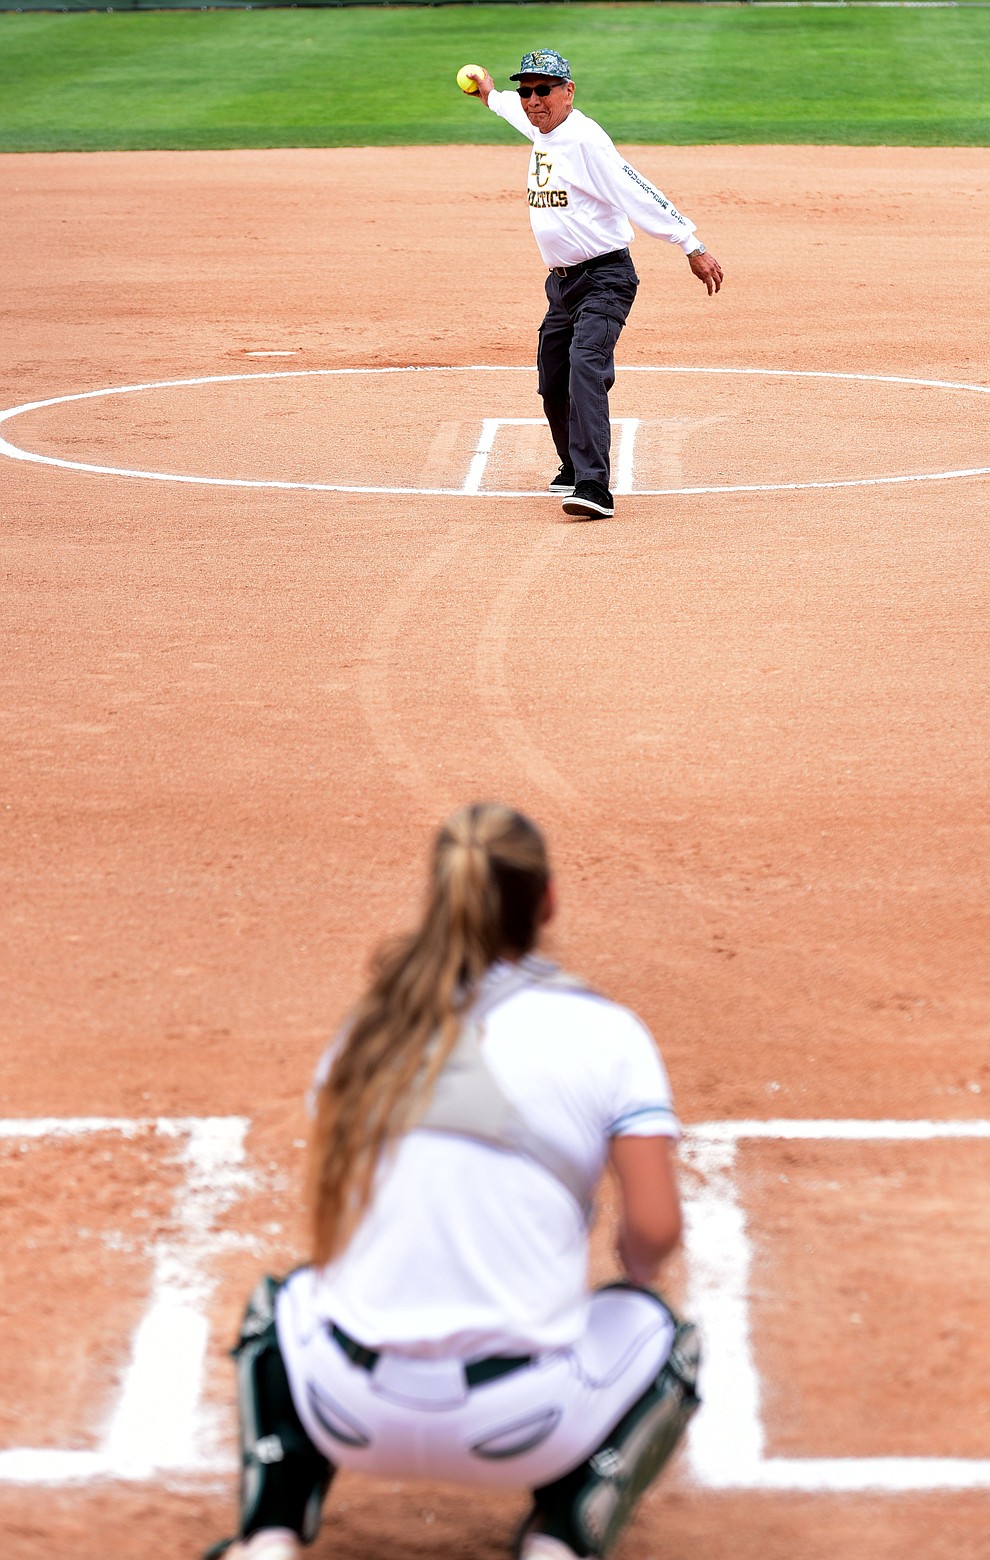 Yavapai/Prescott Indian Tribe President Ernest Jones Sr. throws out the first pitch as the Lady Roughriders play Central Arizona in softball Saturday, April 8 in Prescott.  (Les Stukenberg/Courier)